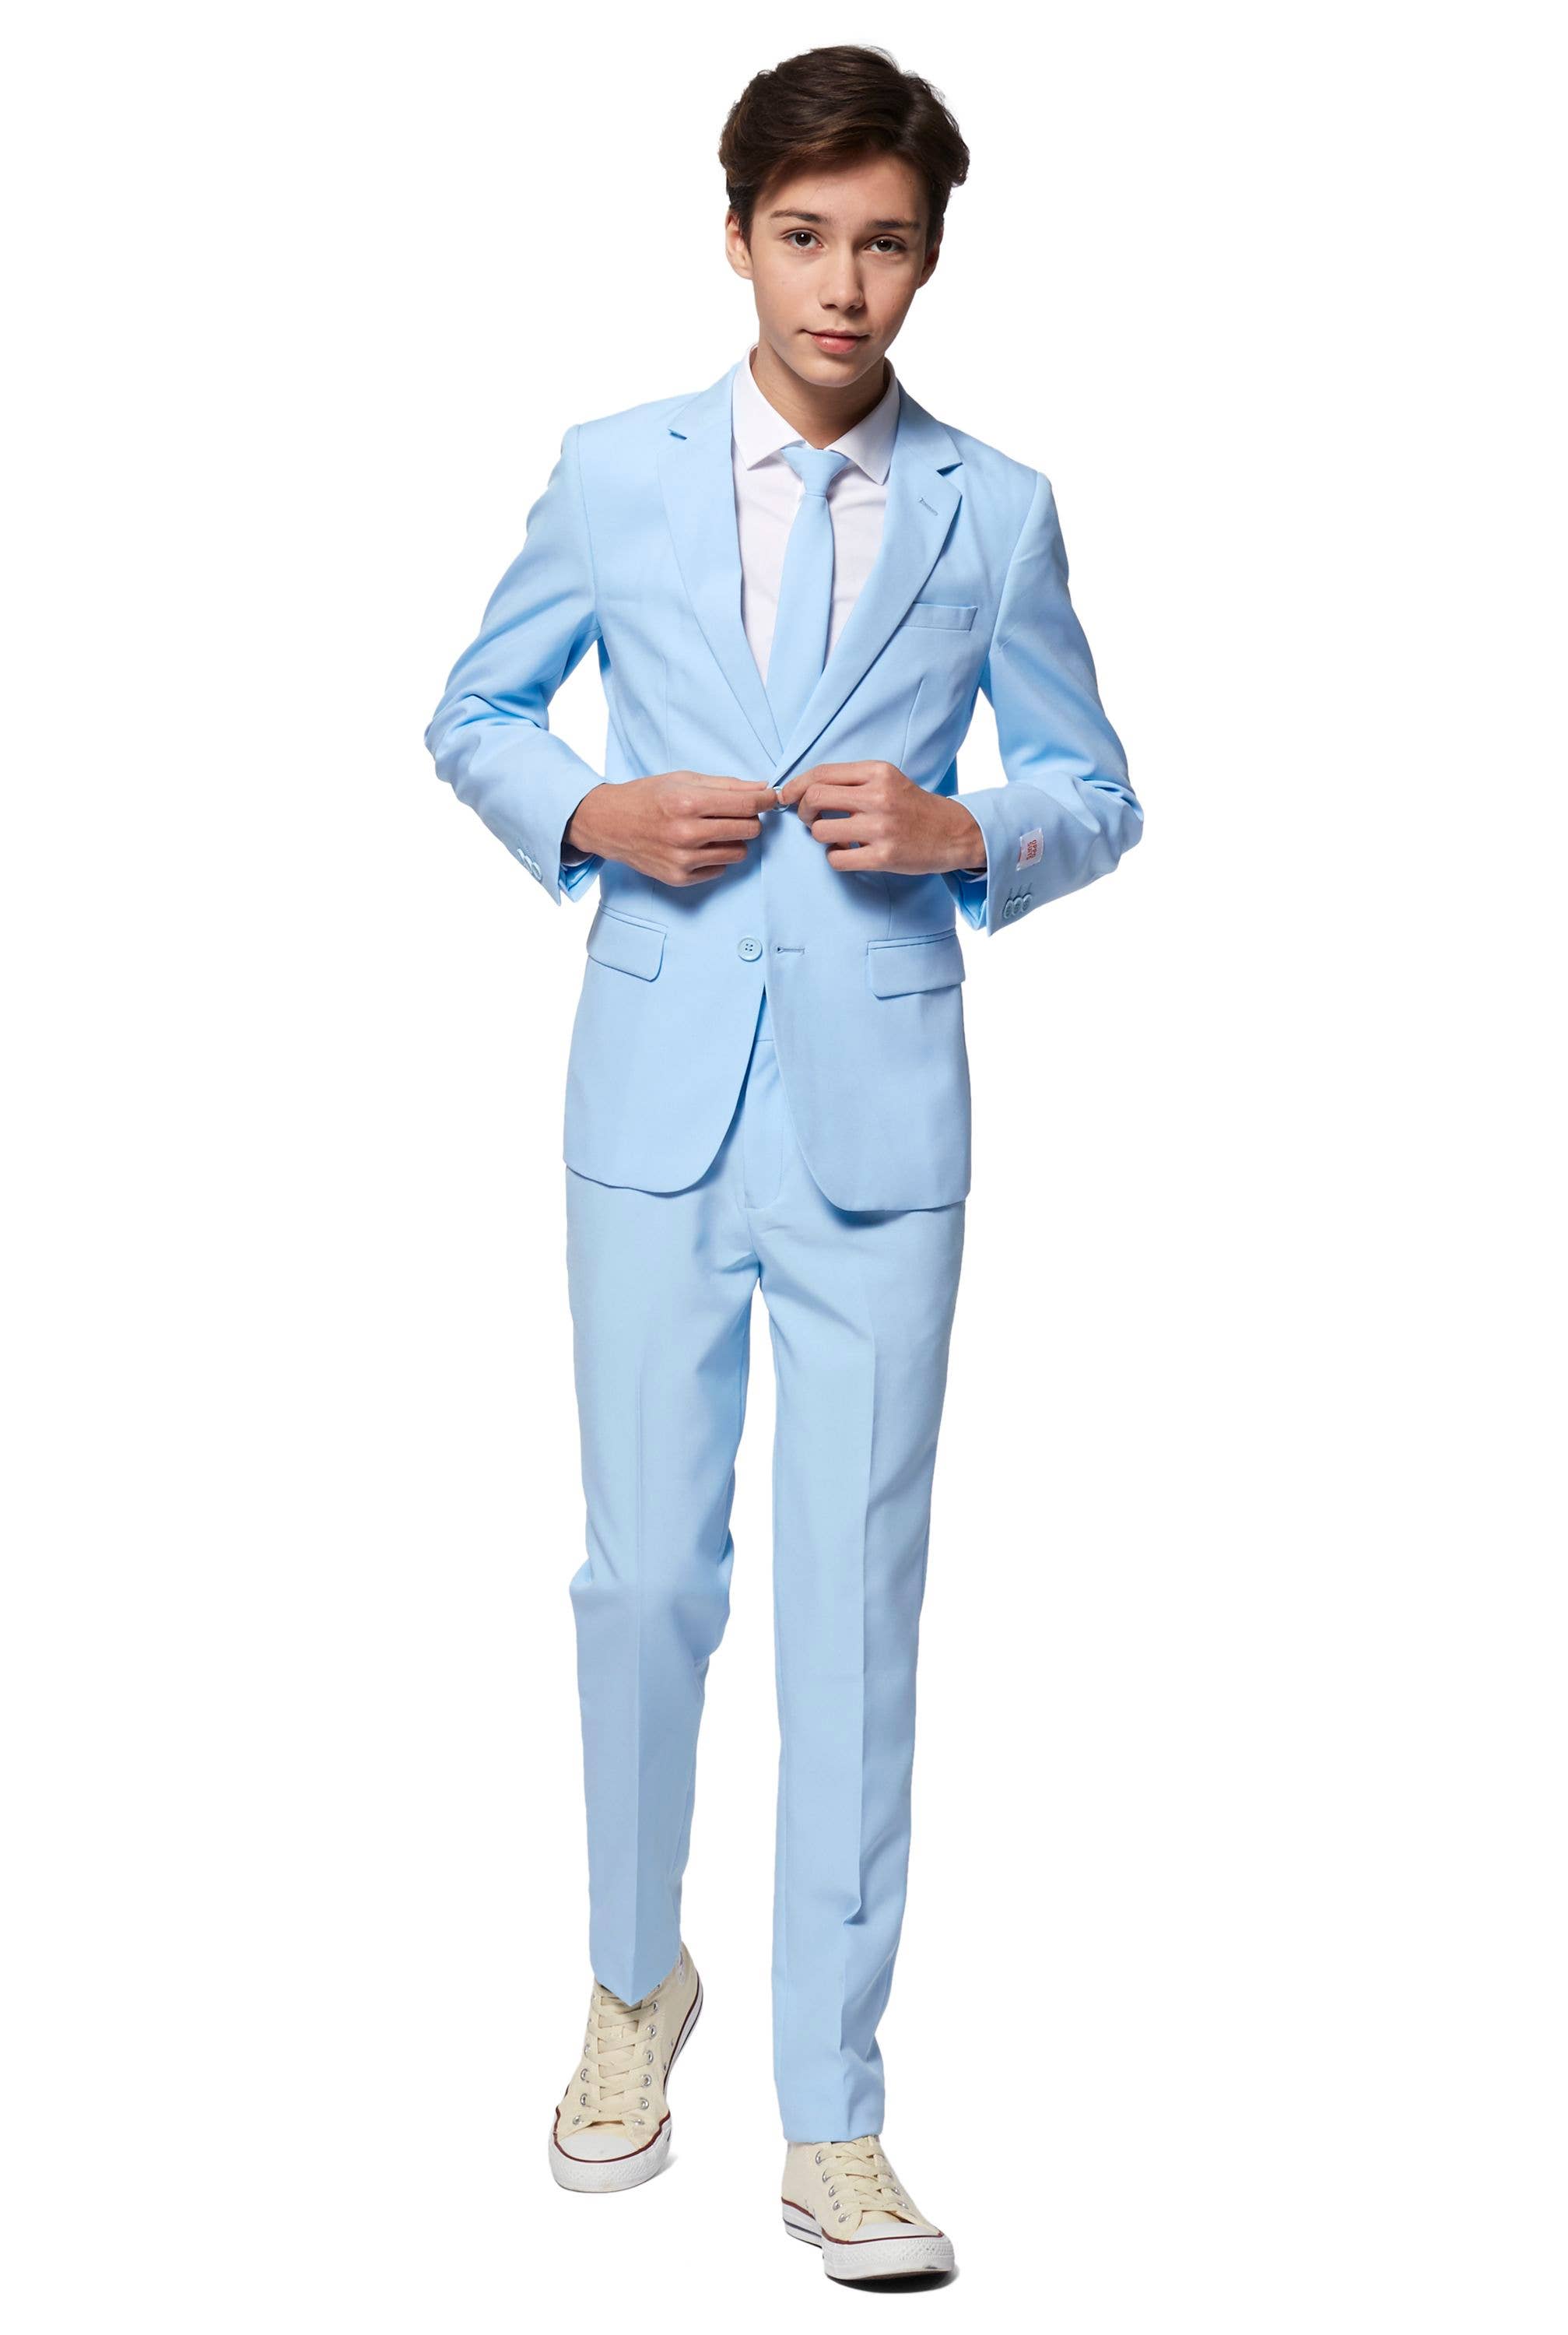 Custom Made Beige Boys Suit For Formal Parties, Weddings, And Special  Occasions Includes Tuxedo Kids Jackets, Pants, Or Vest Available In Sizes 3  To 16 Years From Simonzhao1988, $62.62 | DHgate.Com